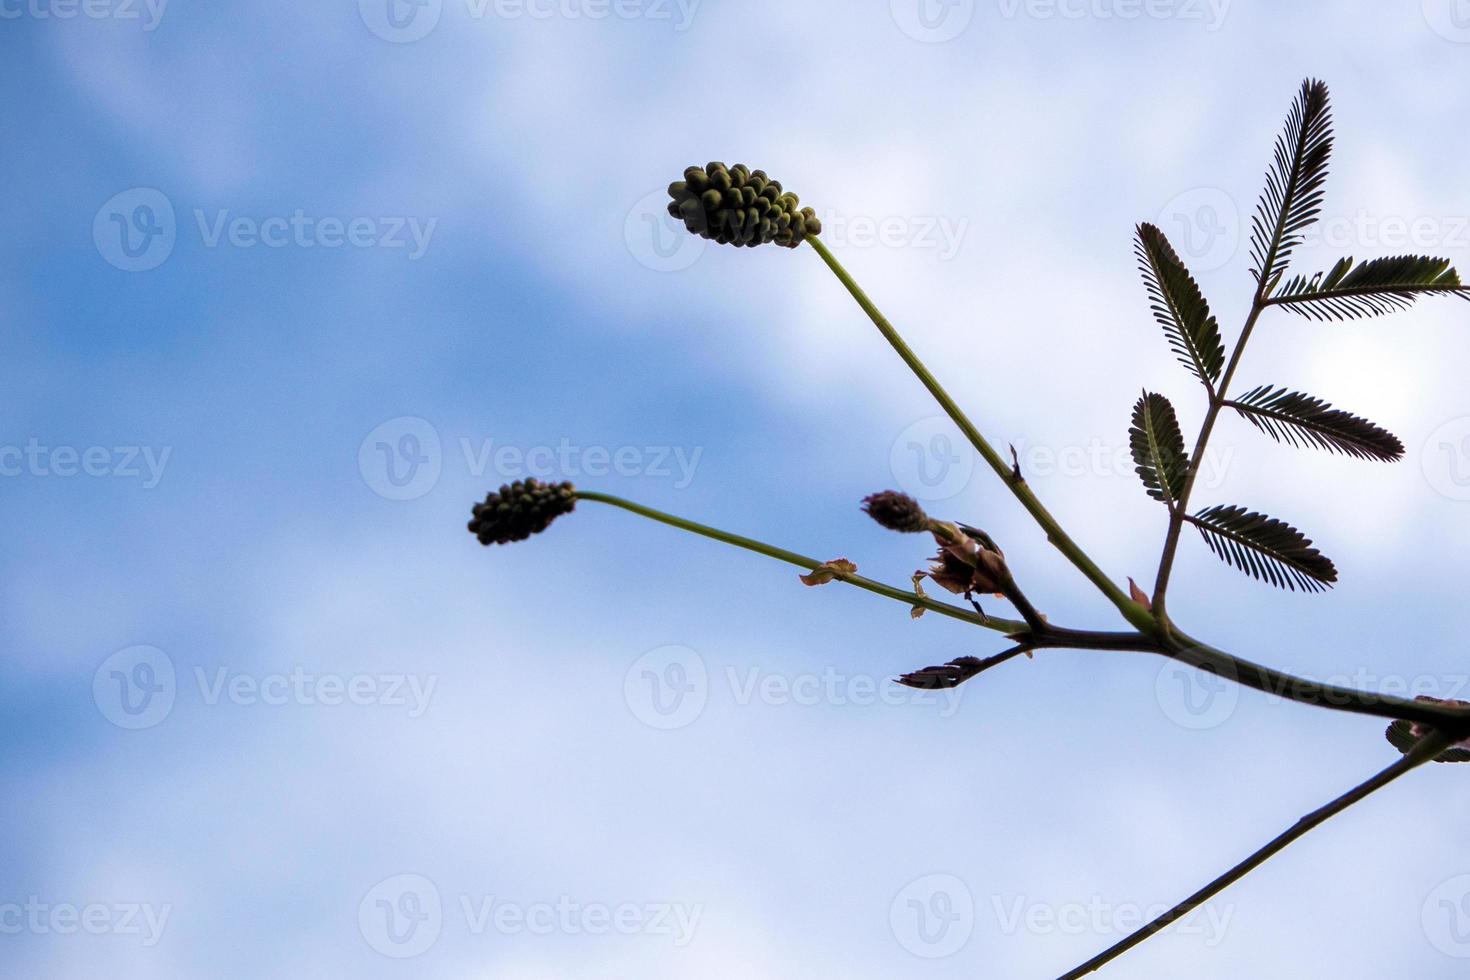 Flower and leaves of Giant sensitive plant in blue sky background photo